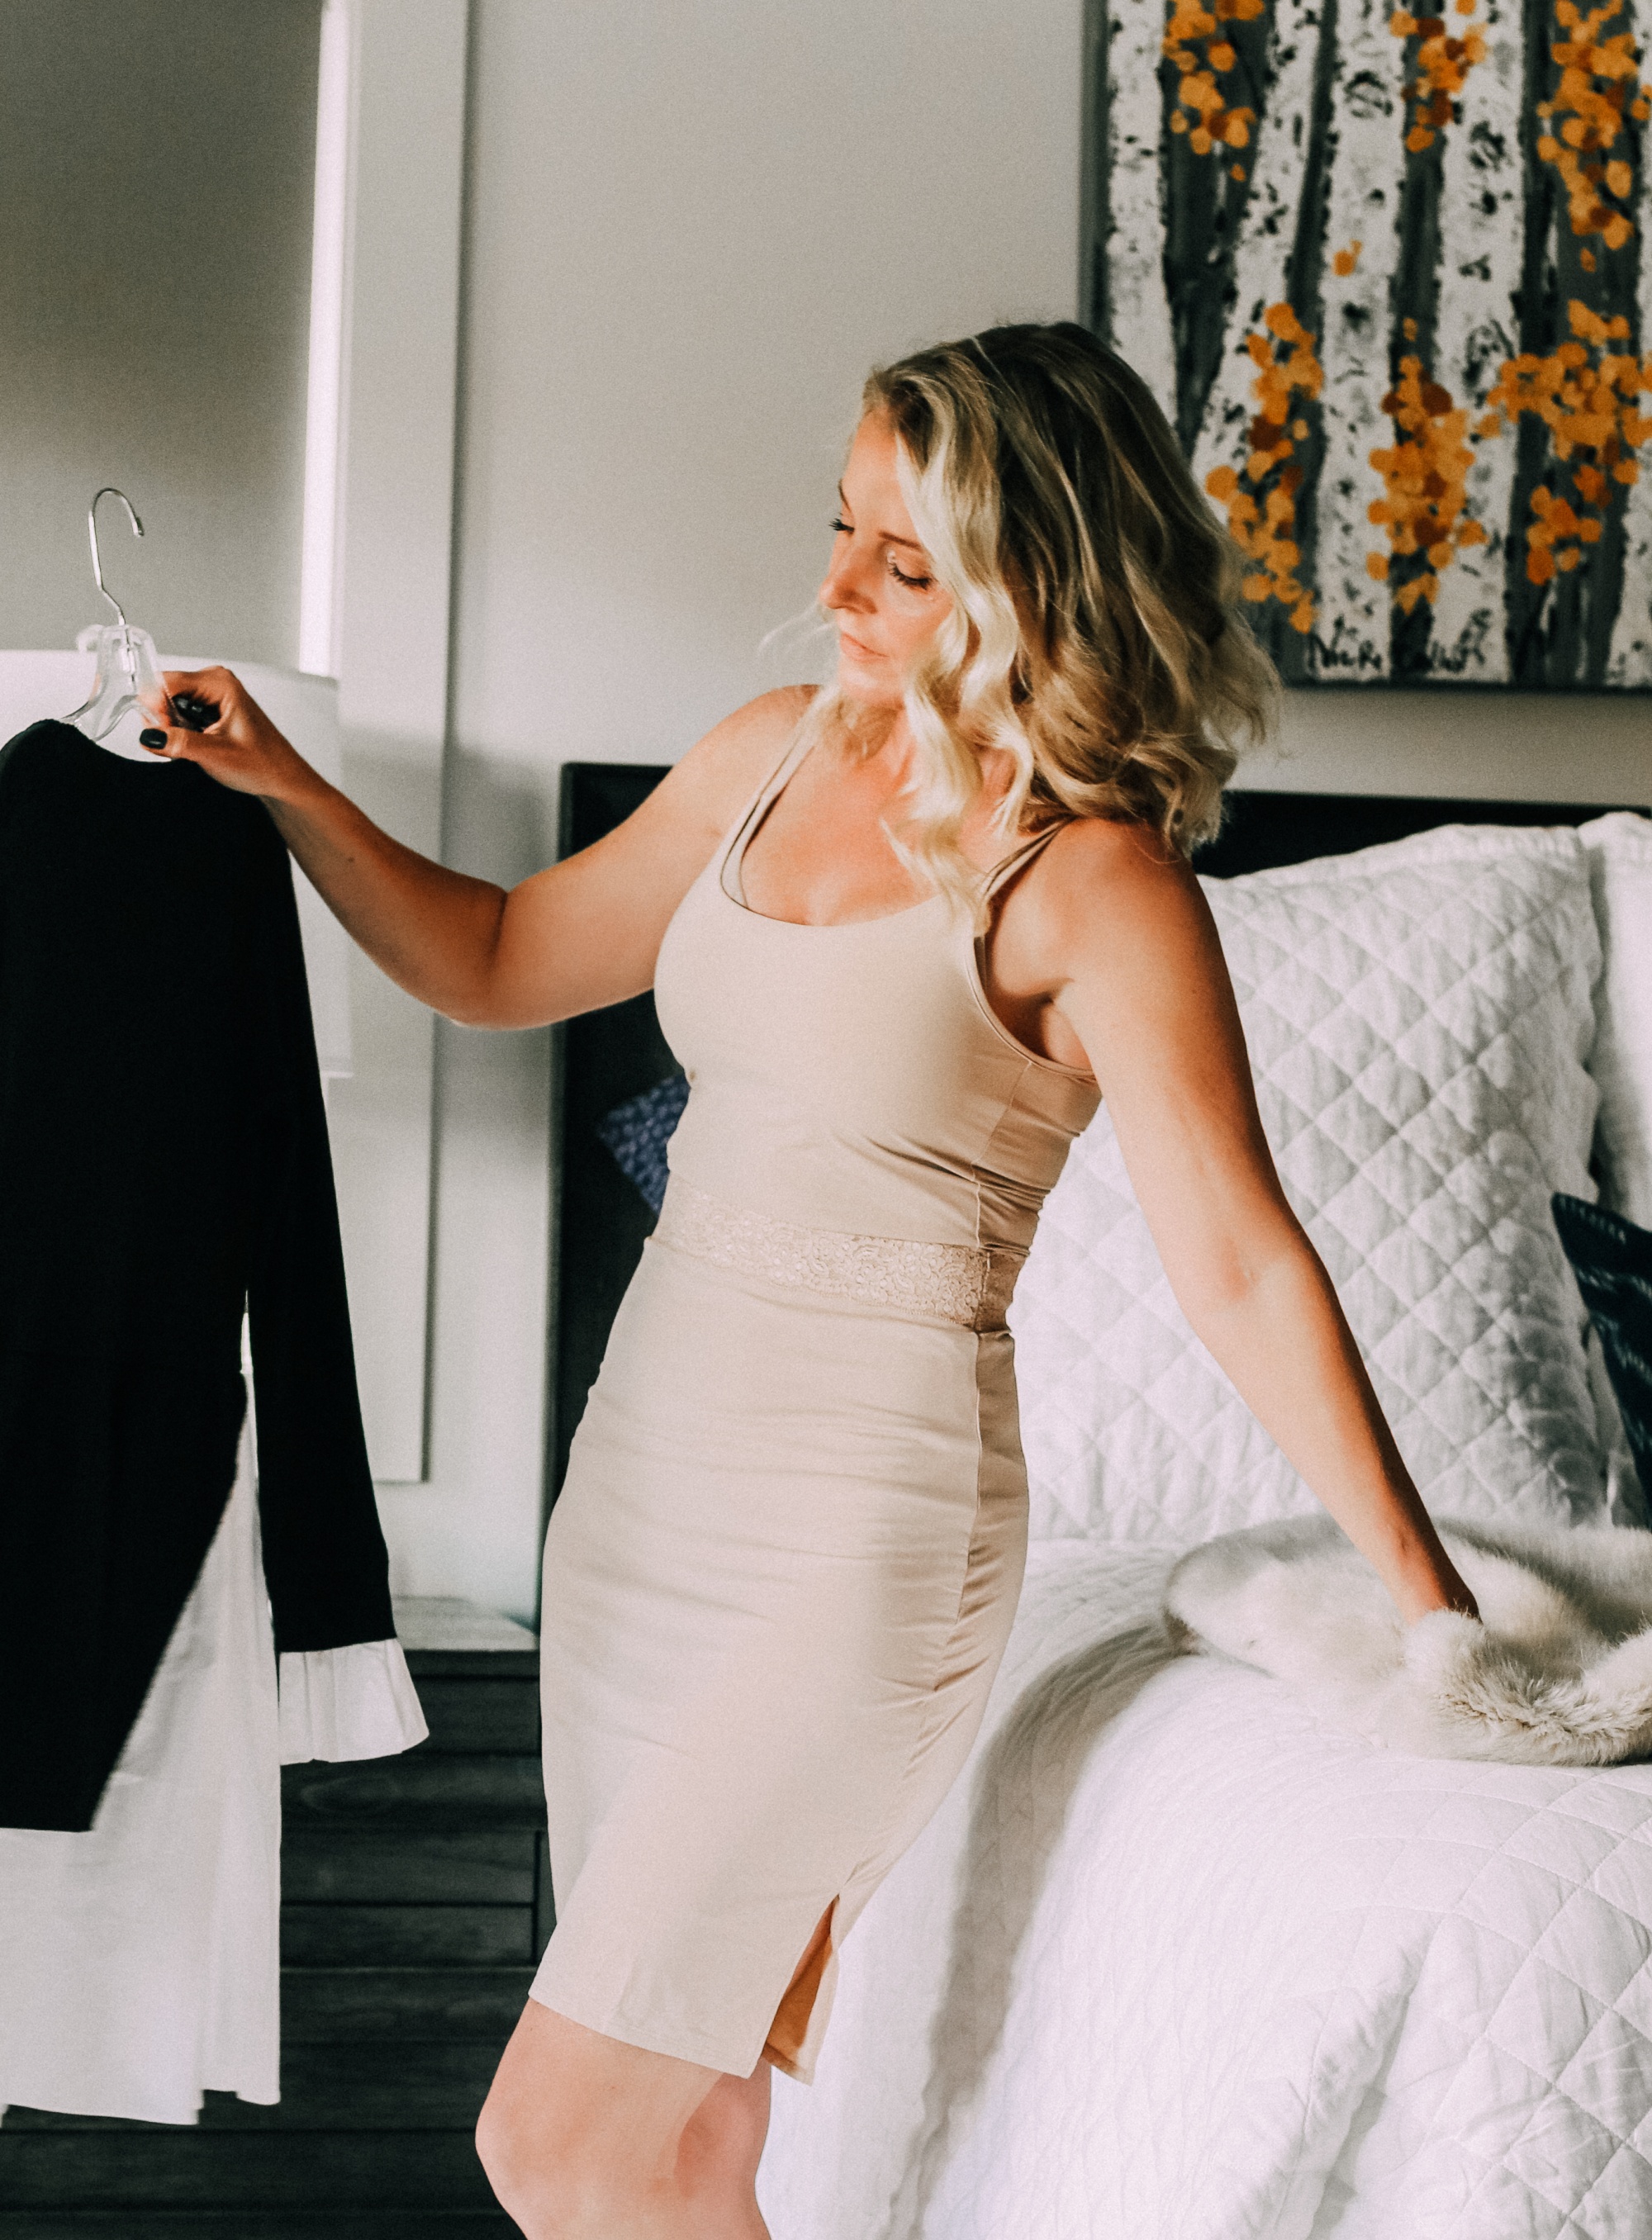 Skirt slips in nude and black from Jockey paired with a adjustible strap camisole and wireless bra on fashion blogger Erin Busbee of Busbee Style